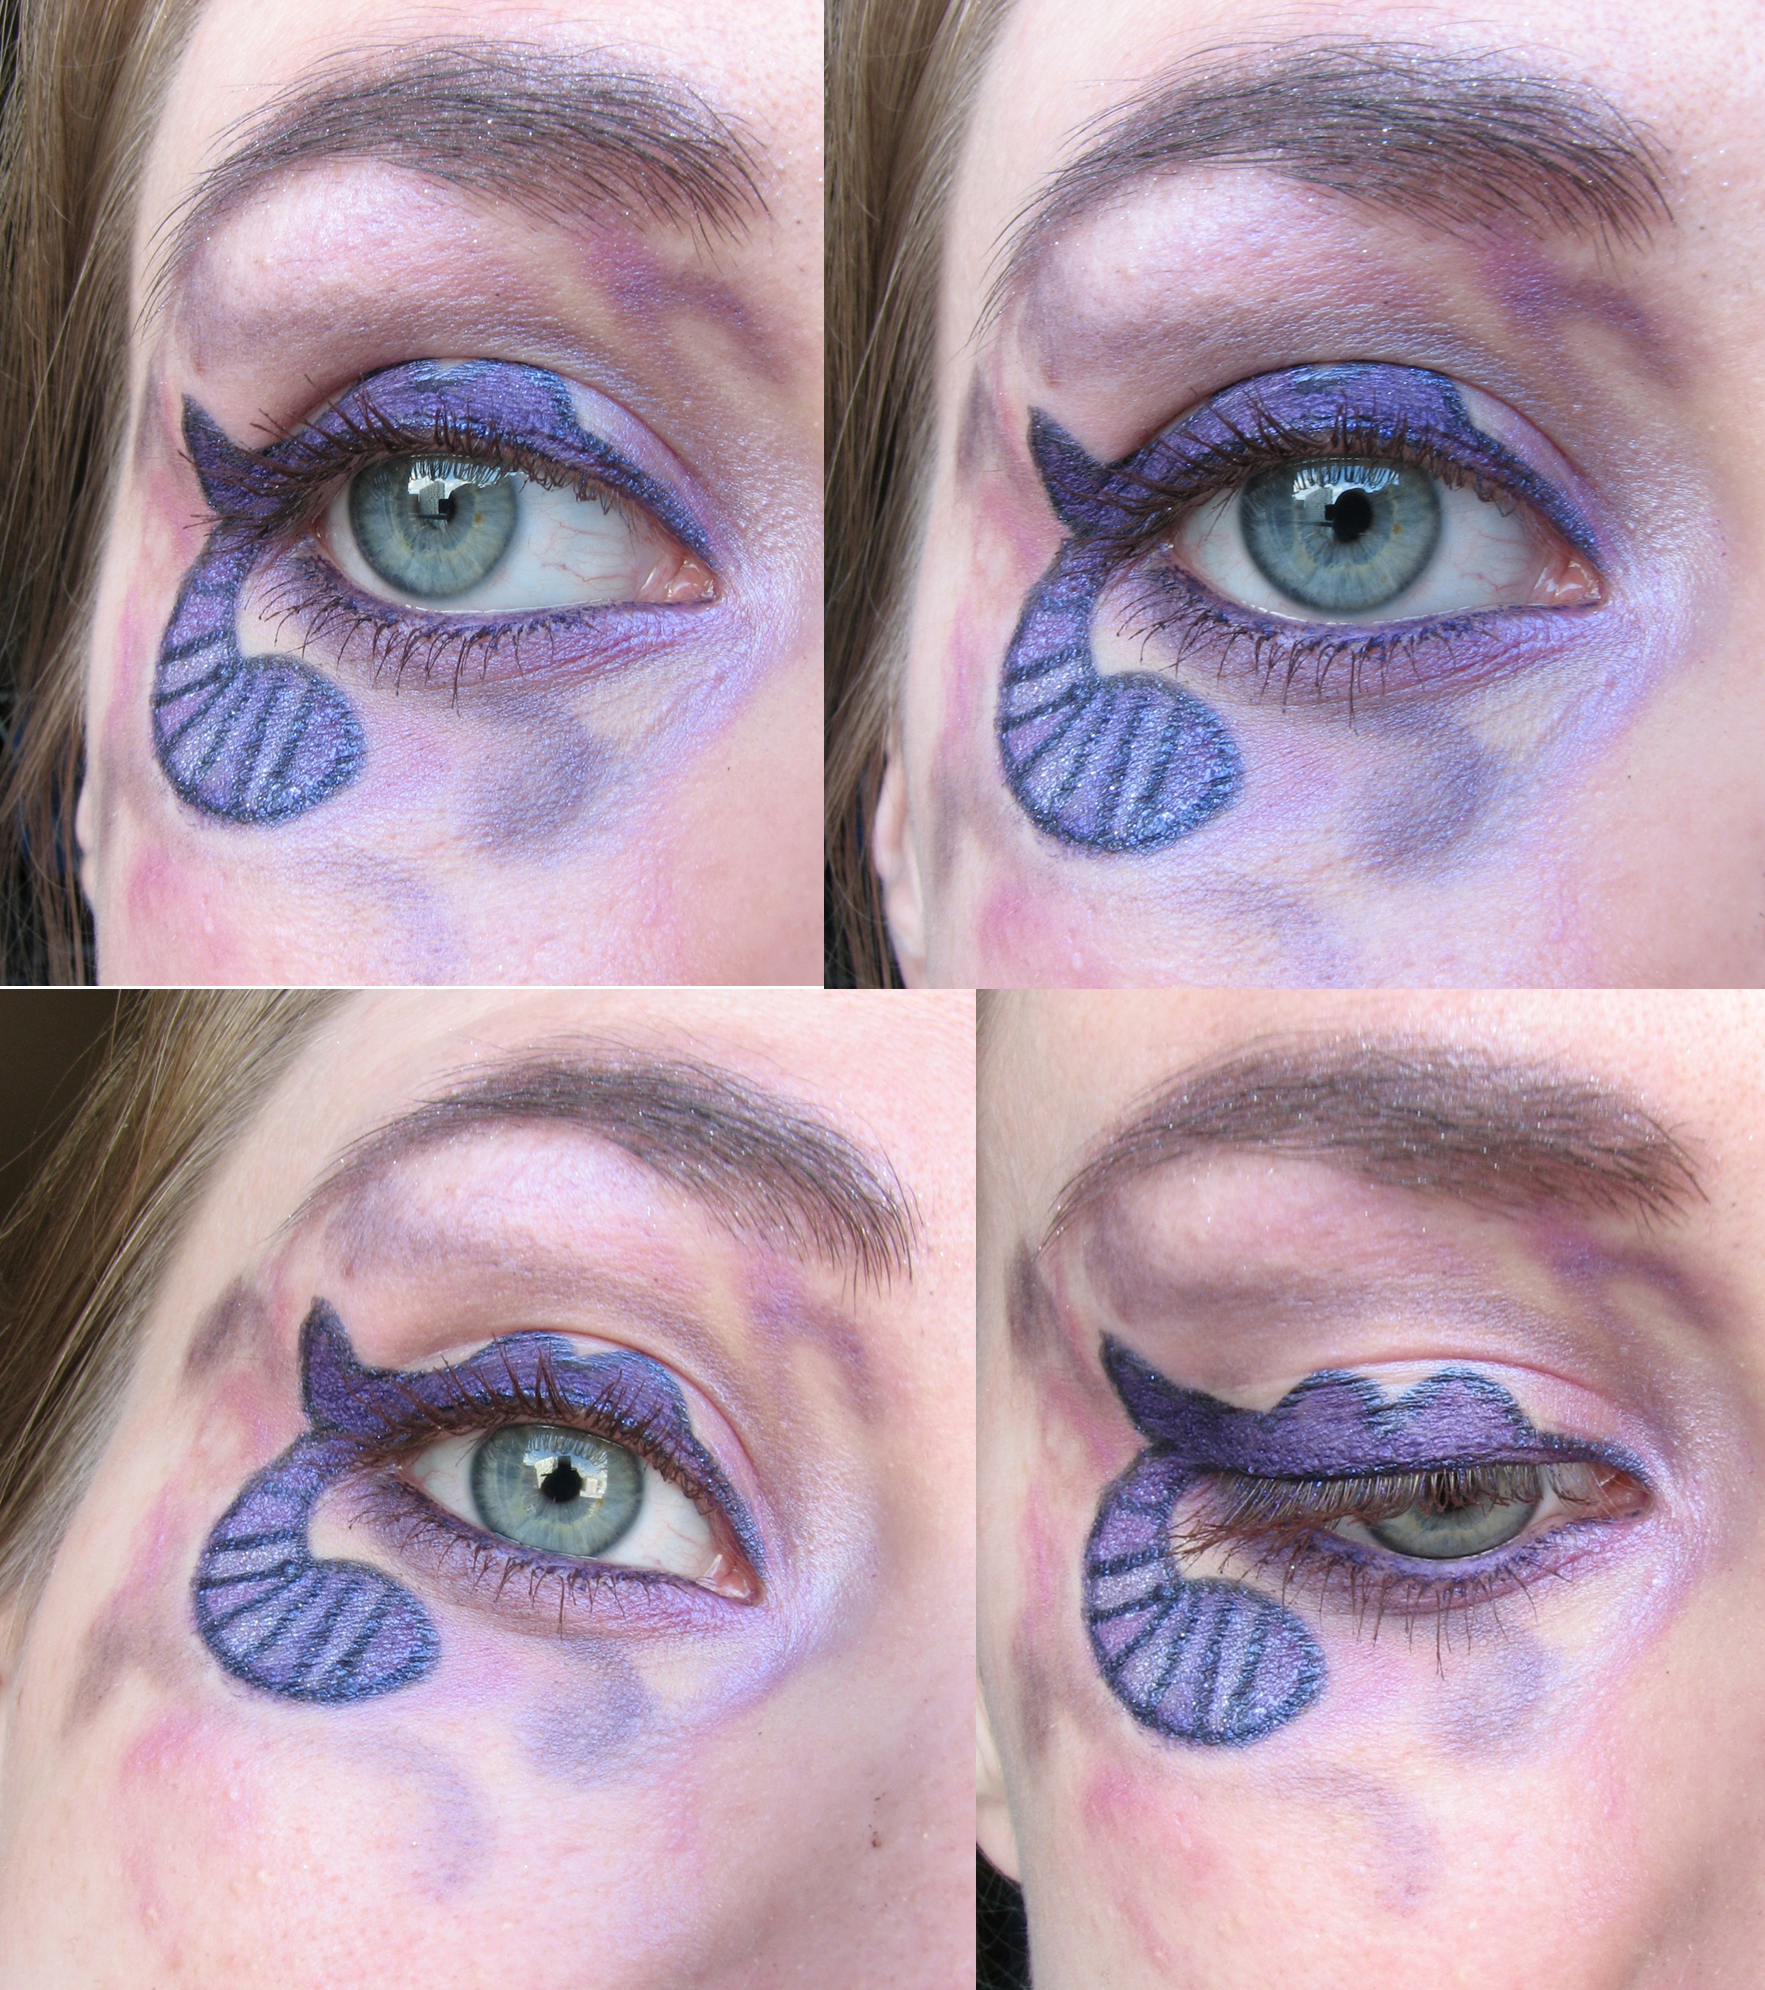 Cheshire Cat Eye Makeup Beauty And The Geek Go To Wonderlandwith Alice And The Cheshire Cat